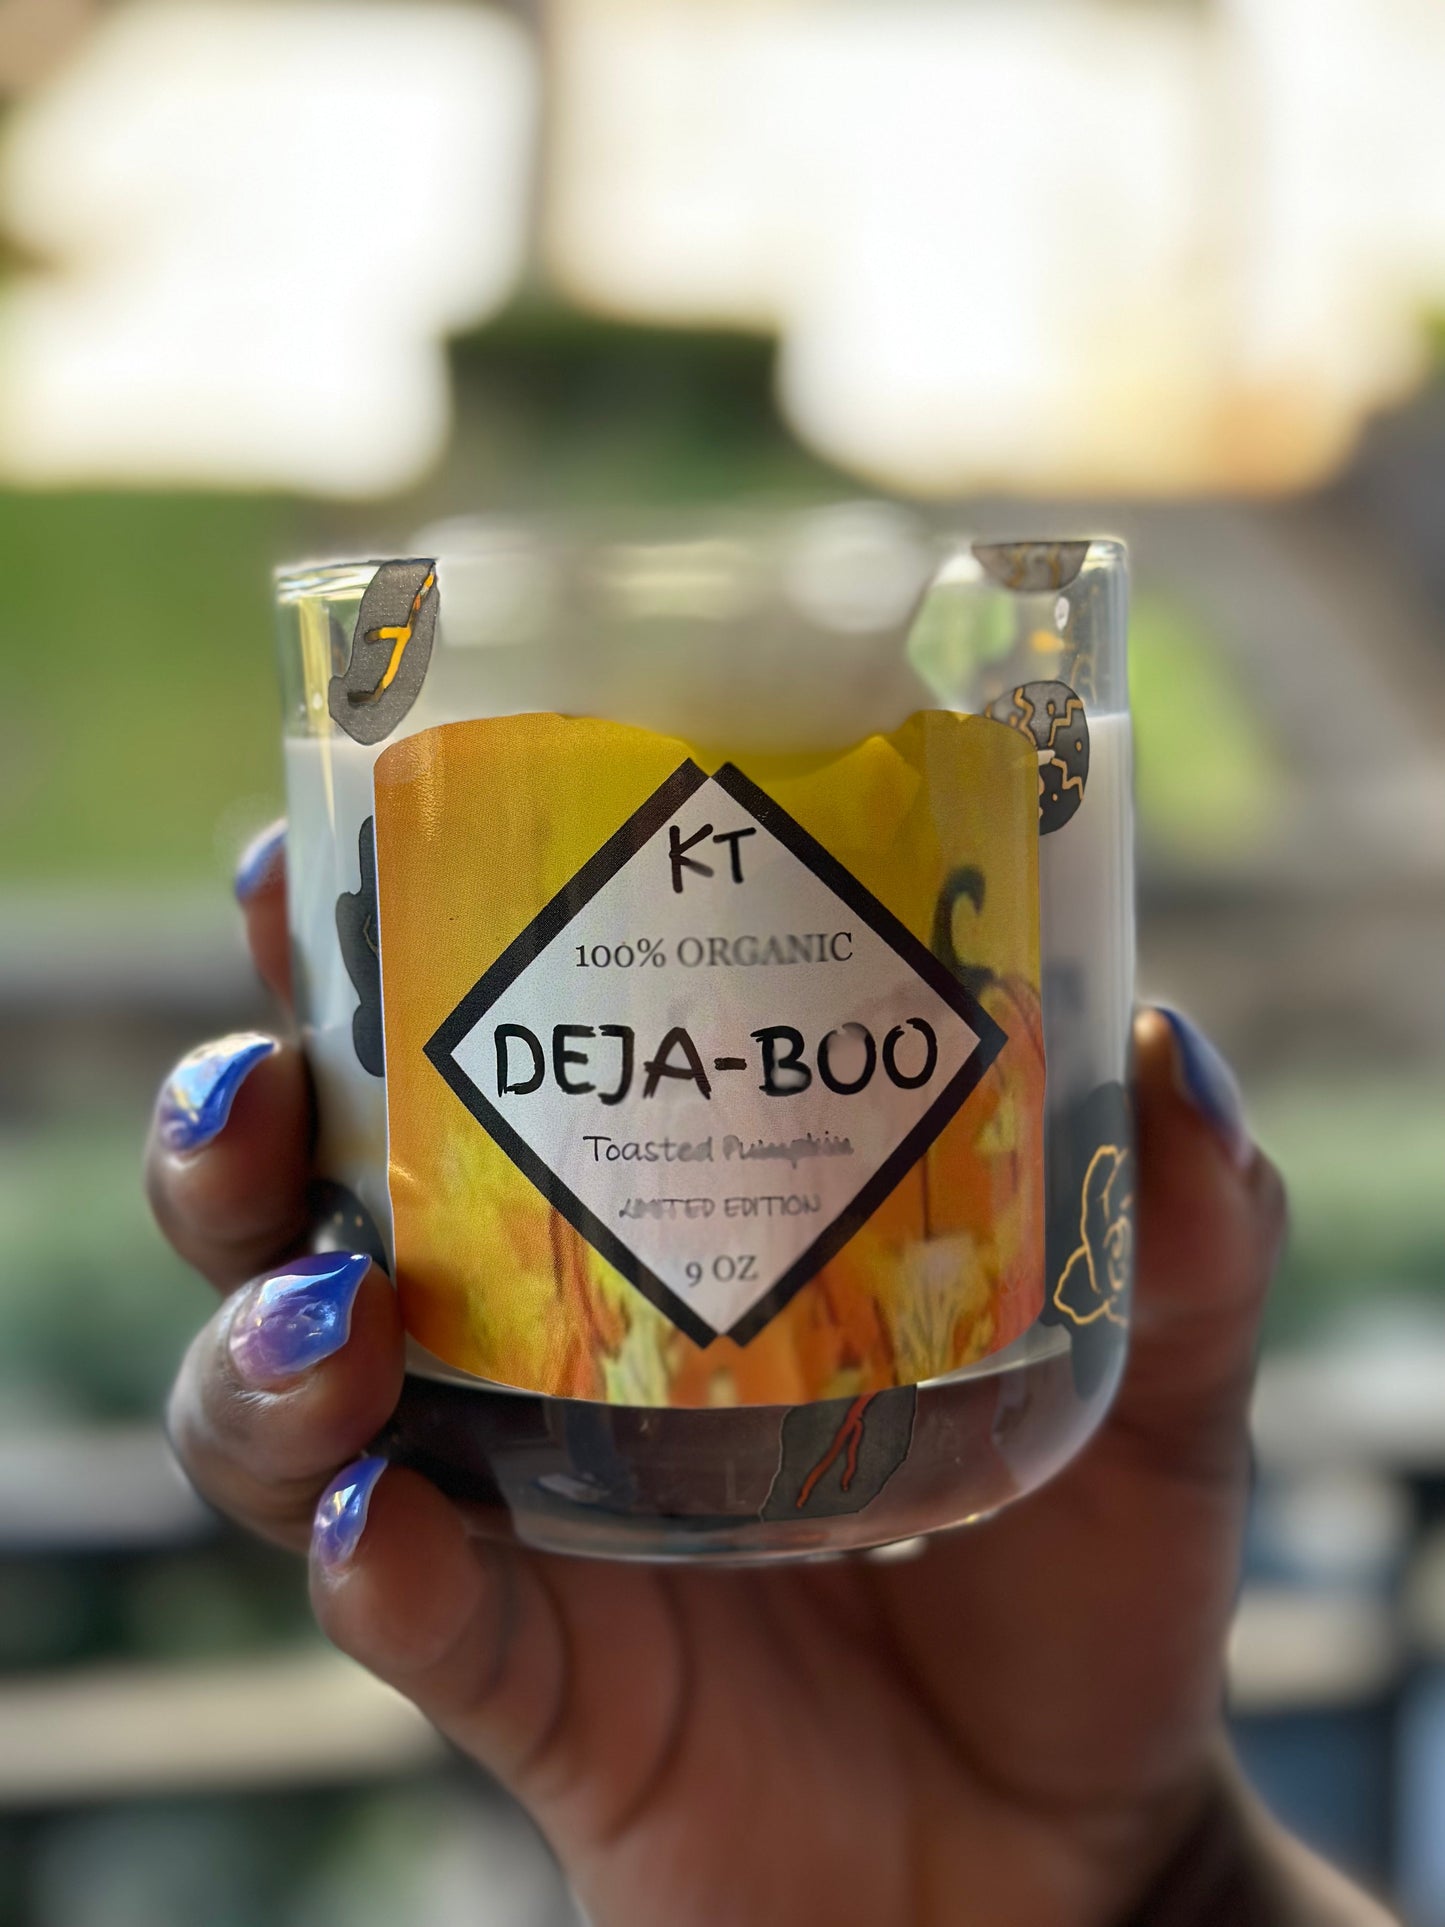 DEJA-BOO EDITION LIMITE - Scented Candles - Kaprice Tropical Candle Shop